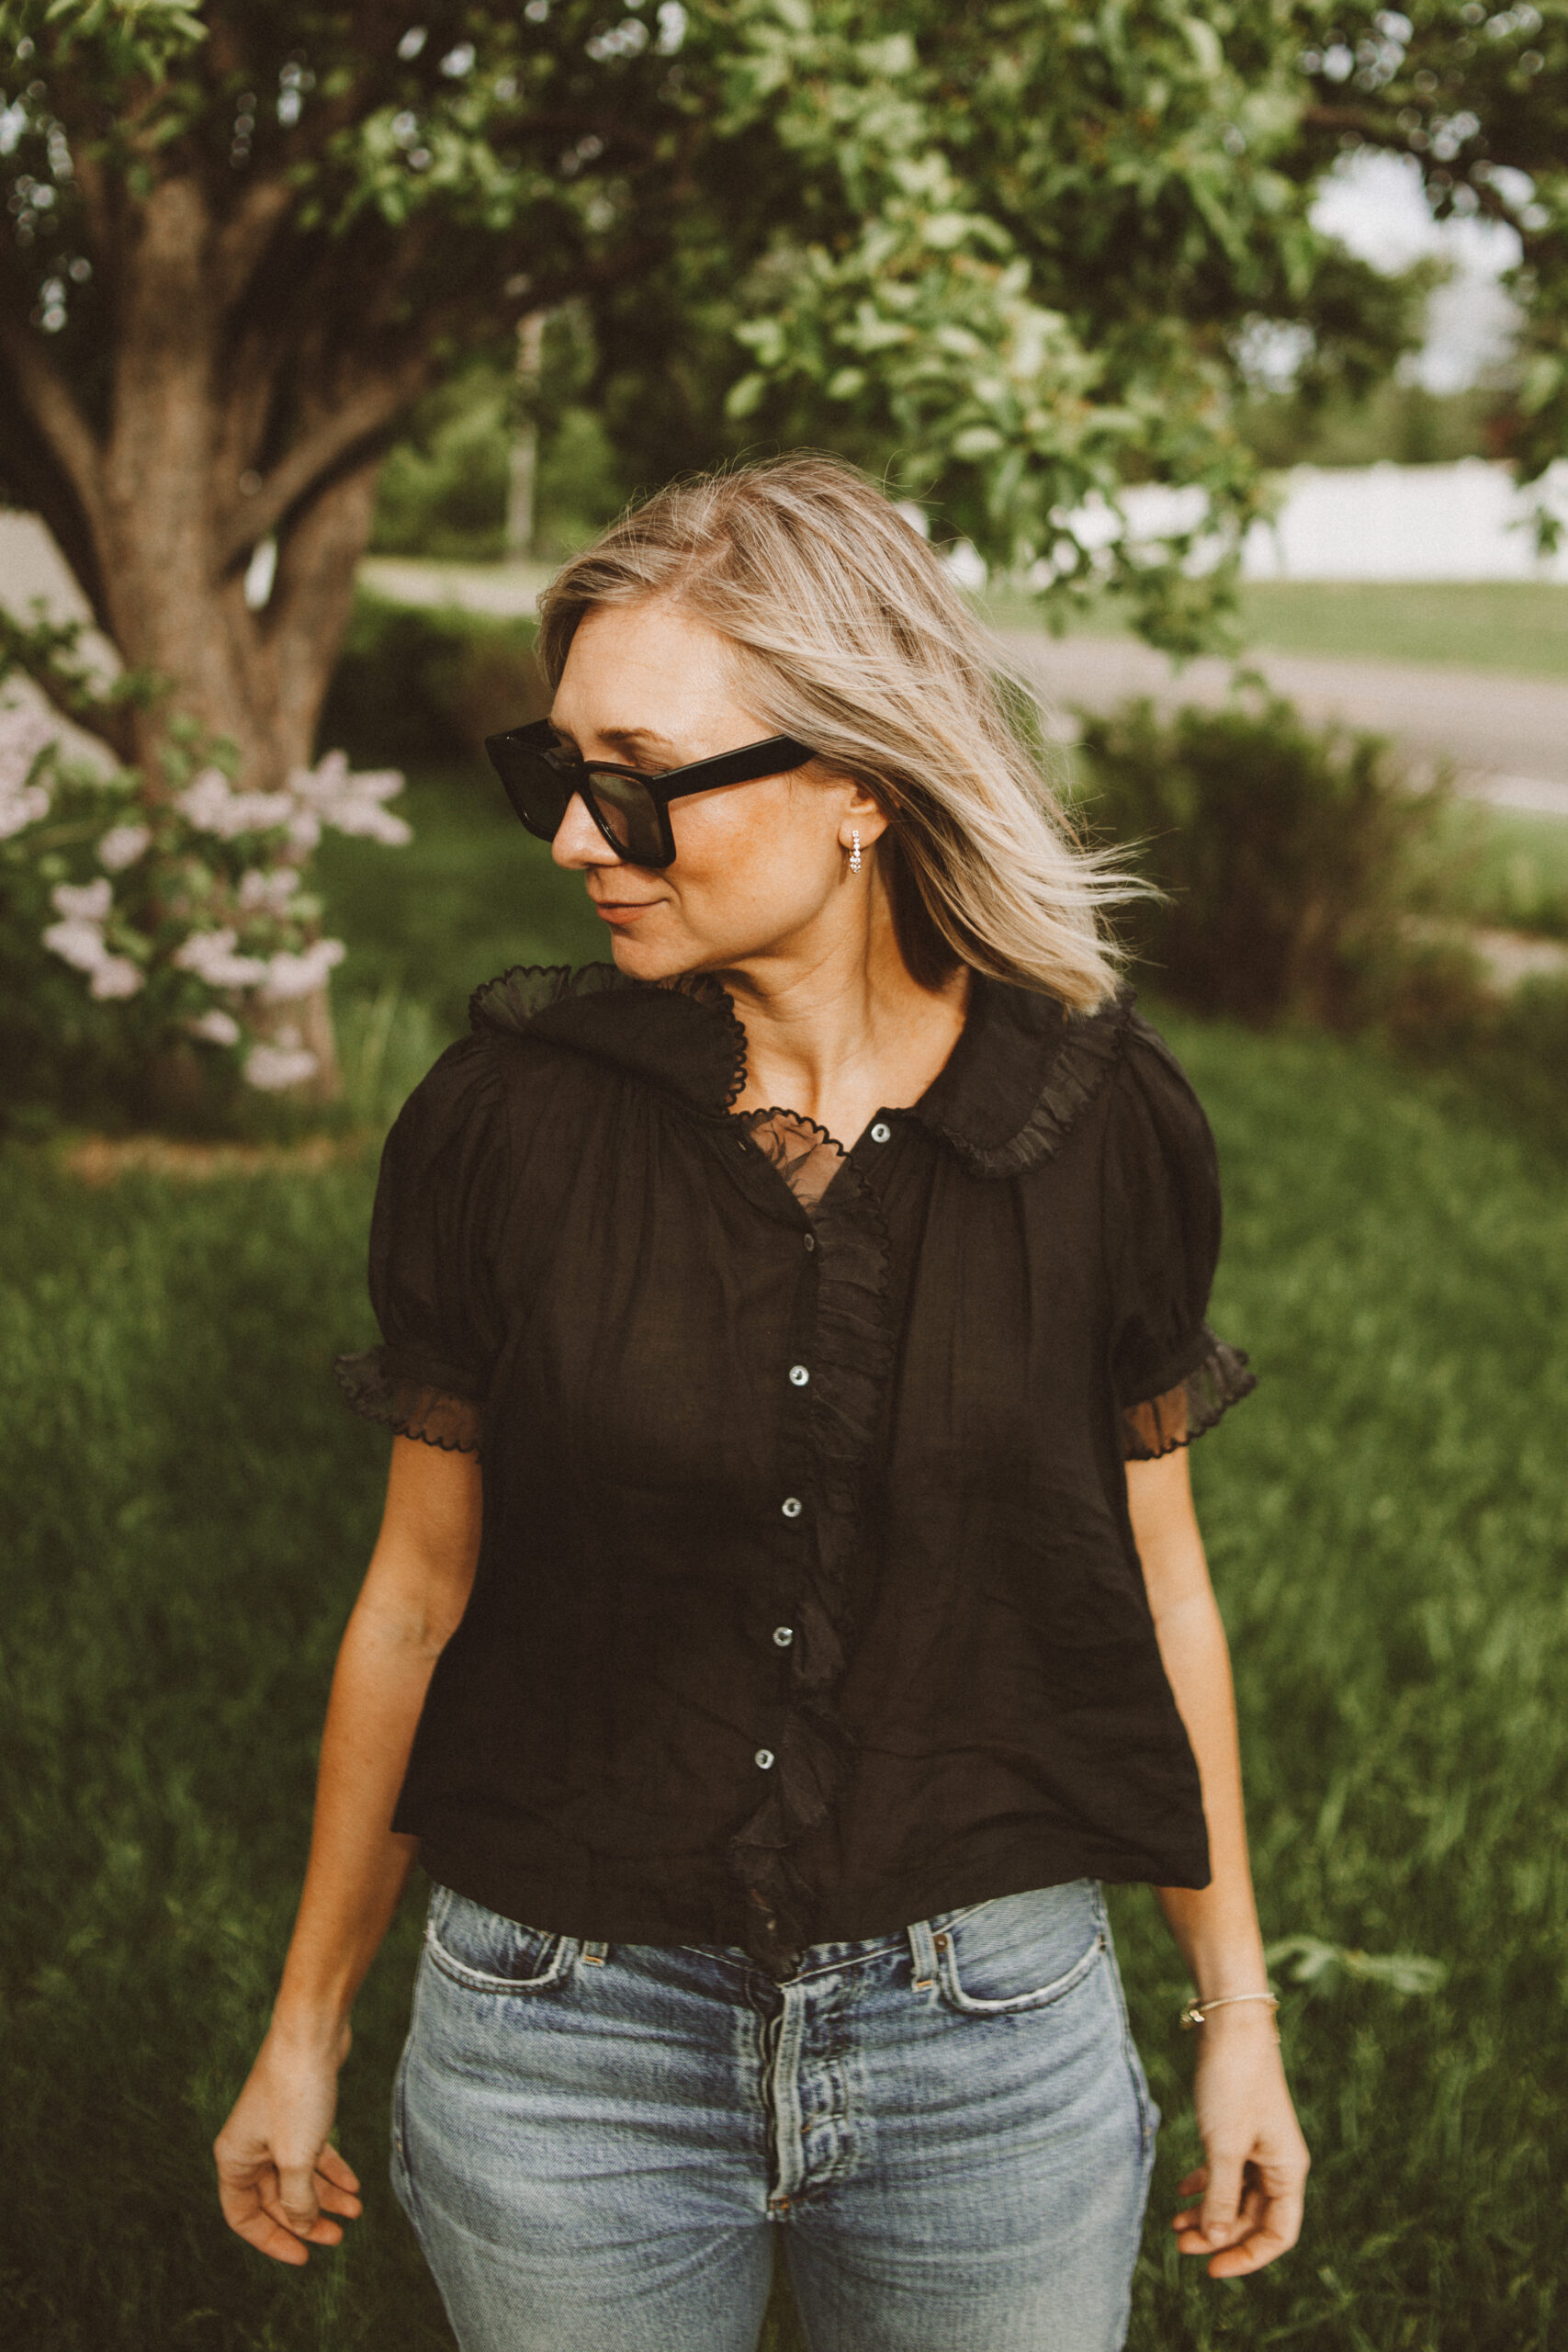 Karin Emily wears one of her favorite romantic blouses for summer with a pair of jeans, black sunglasses, and black sandals